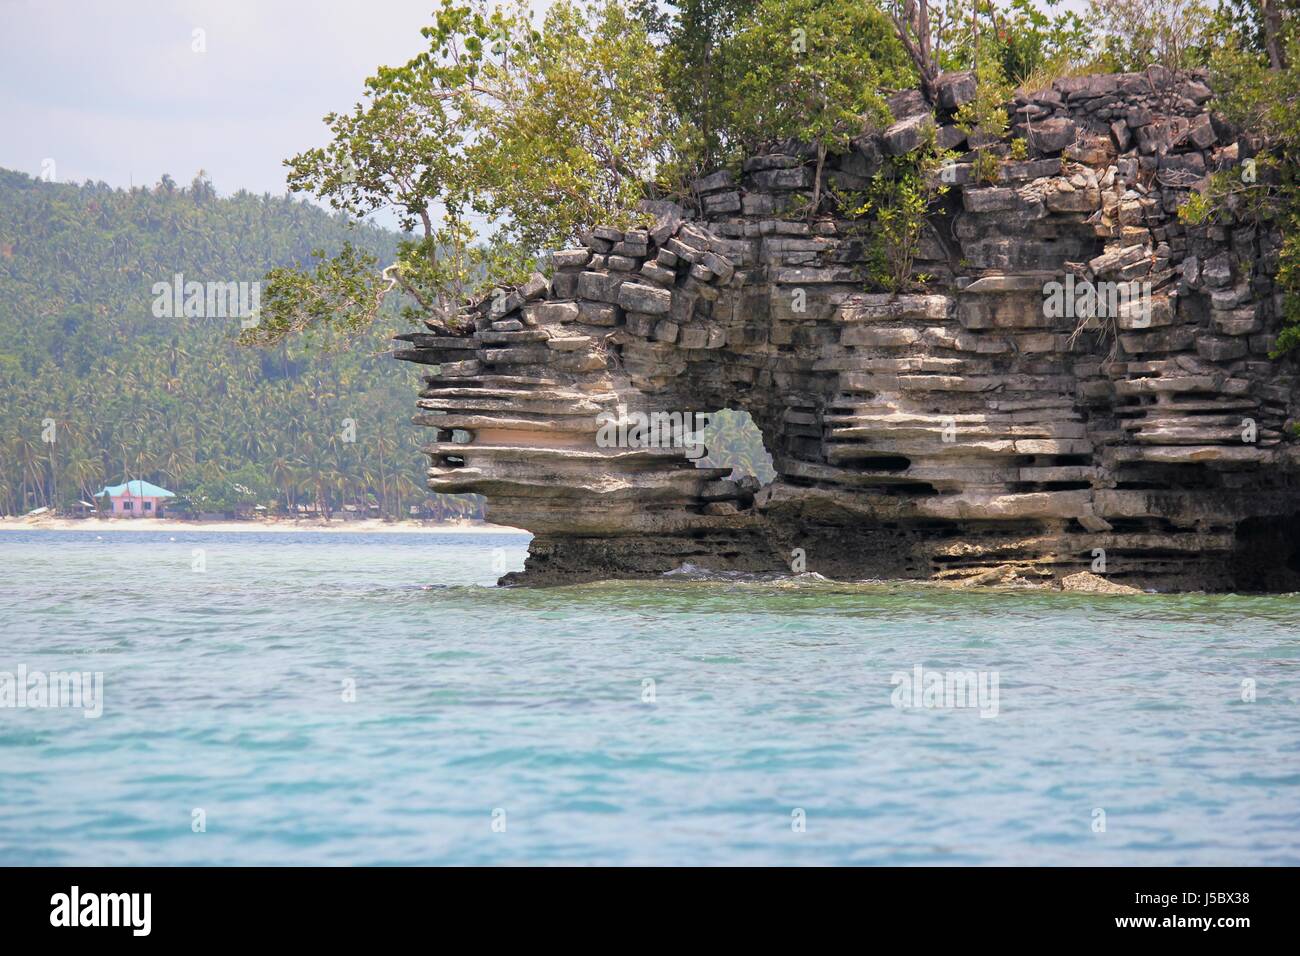 A beautiful pile of stones in an islet in Cantilan, Surigao del Sur, southern Philippines. Stock Photo